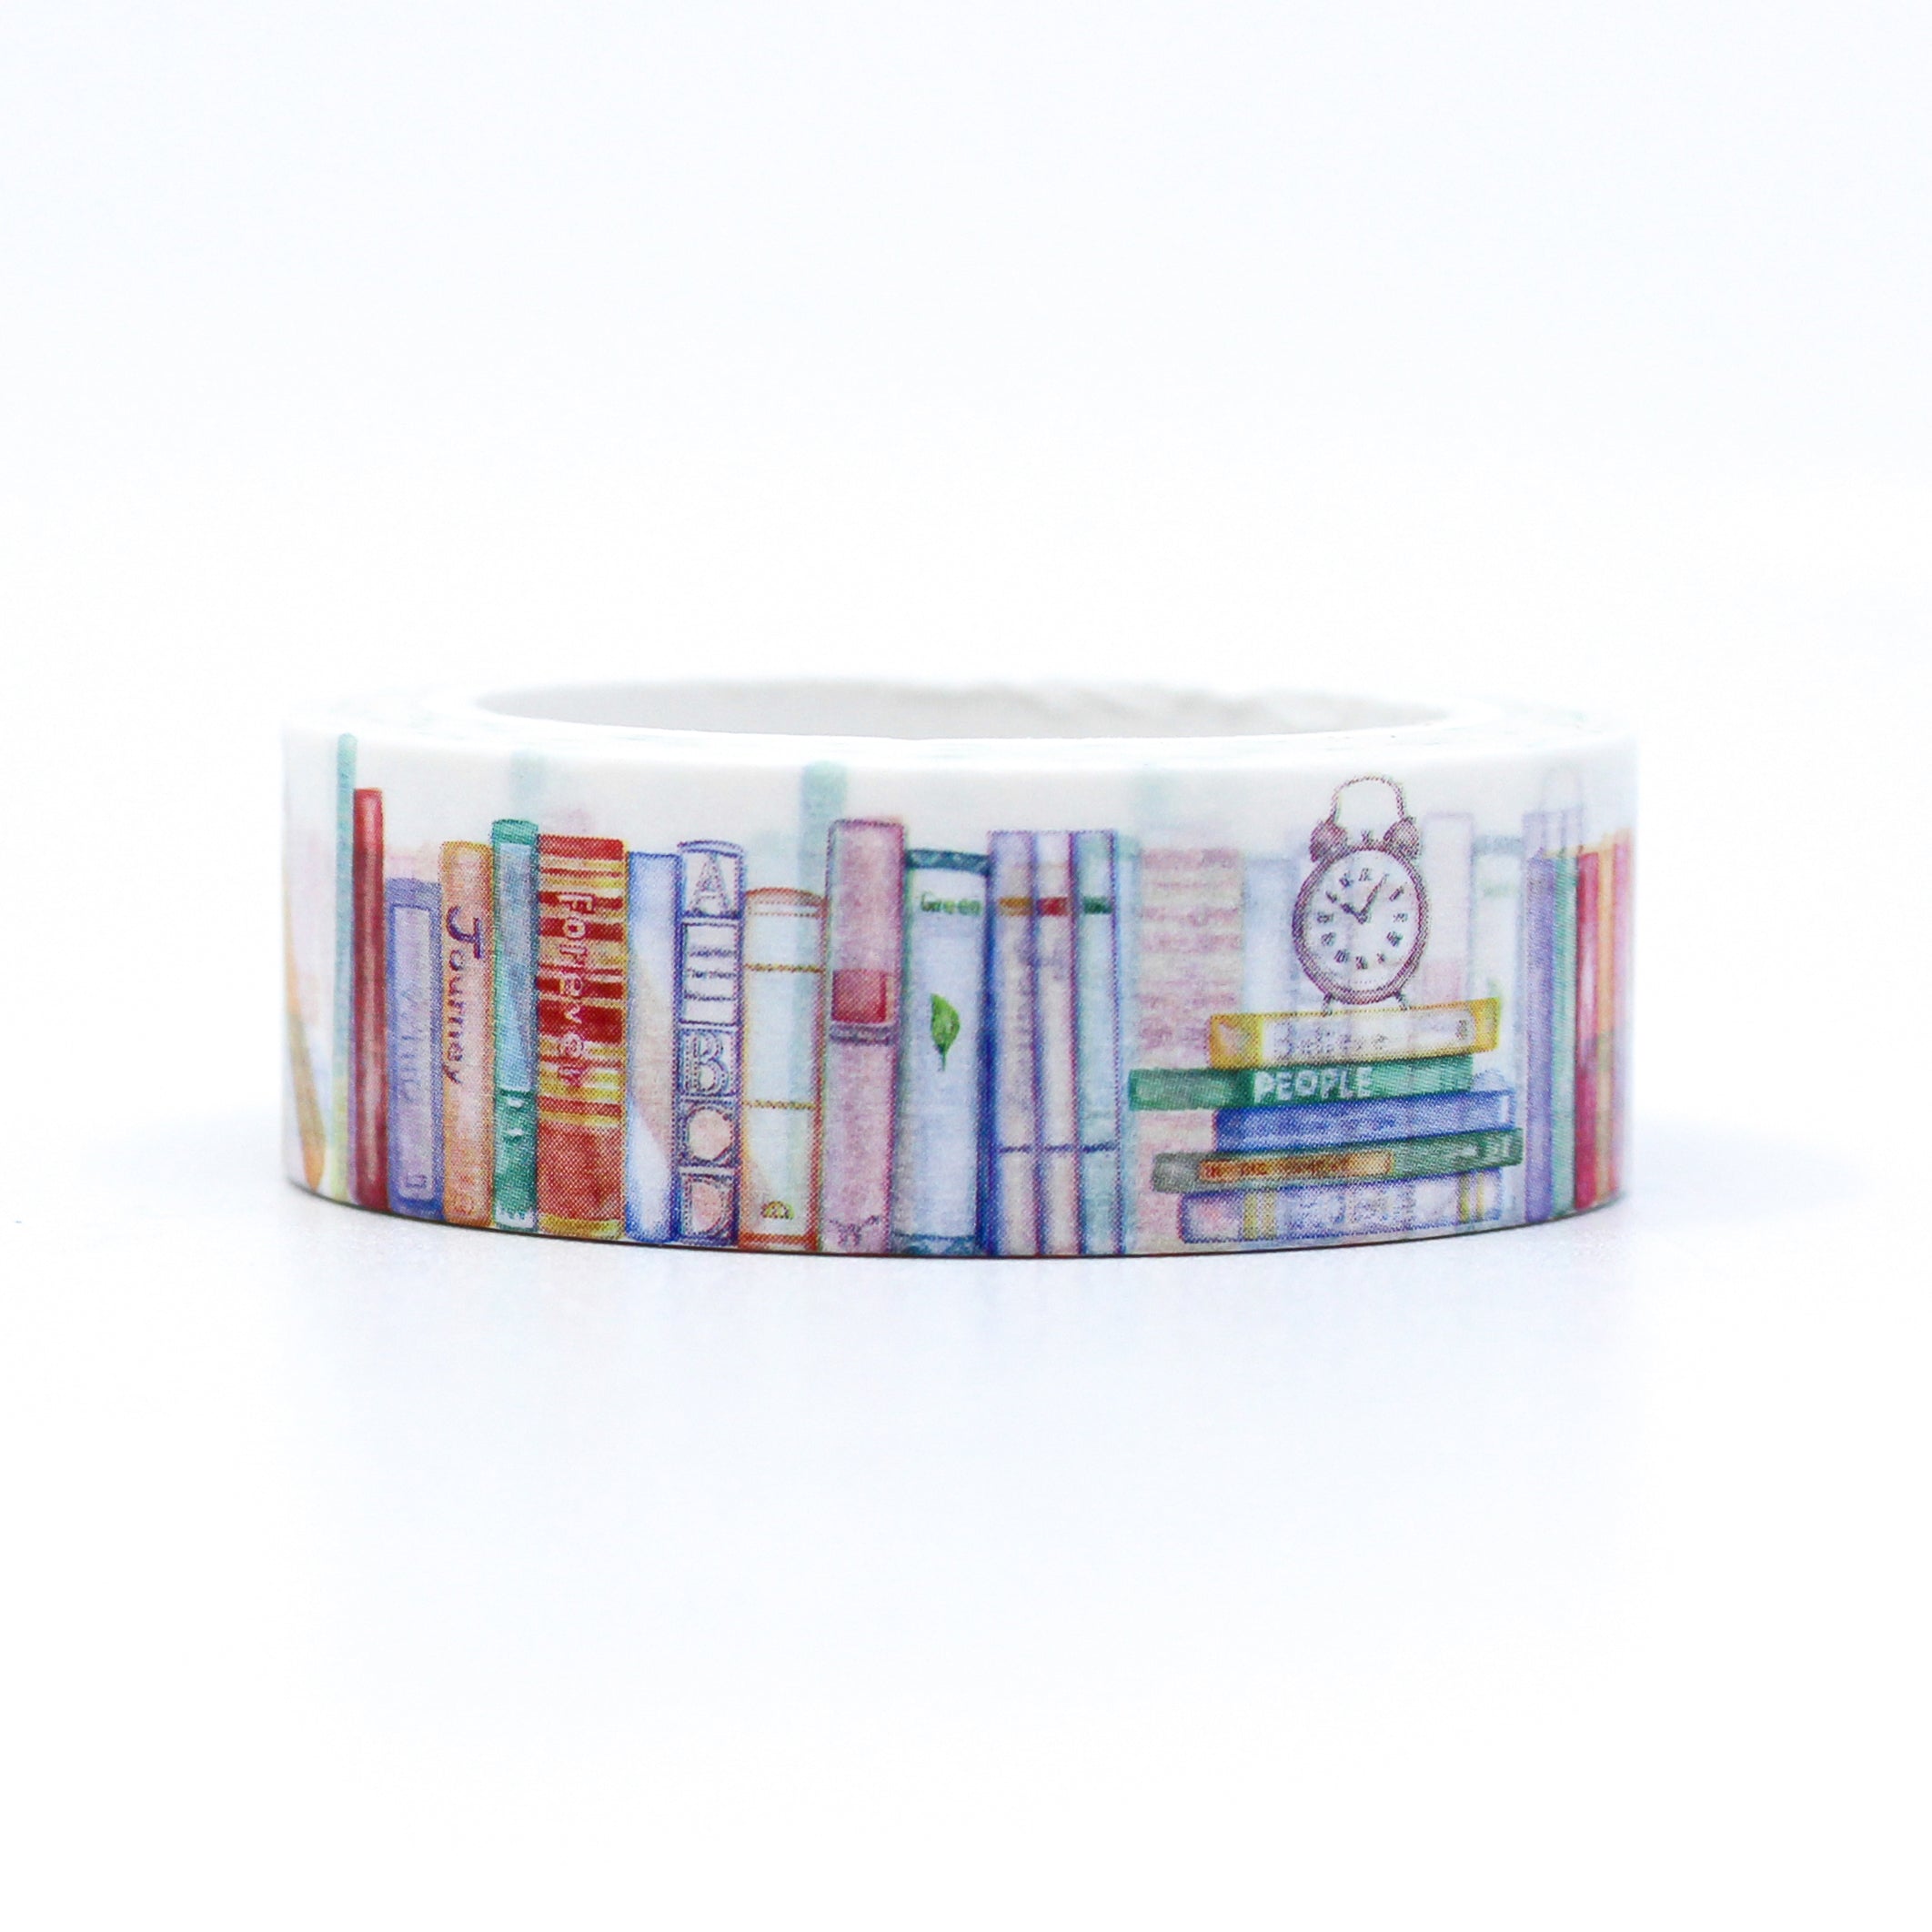 This is a colorful pencils washi tape from BBB Supplies Craft Shop